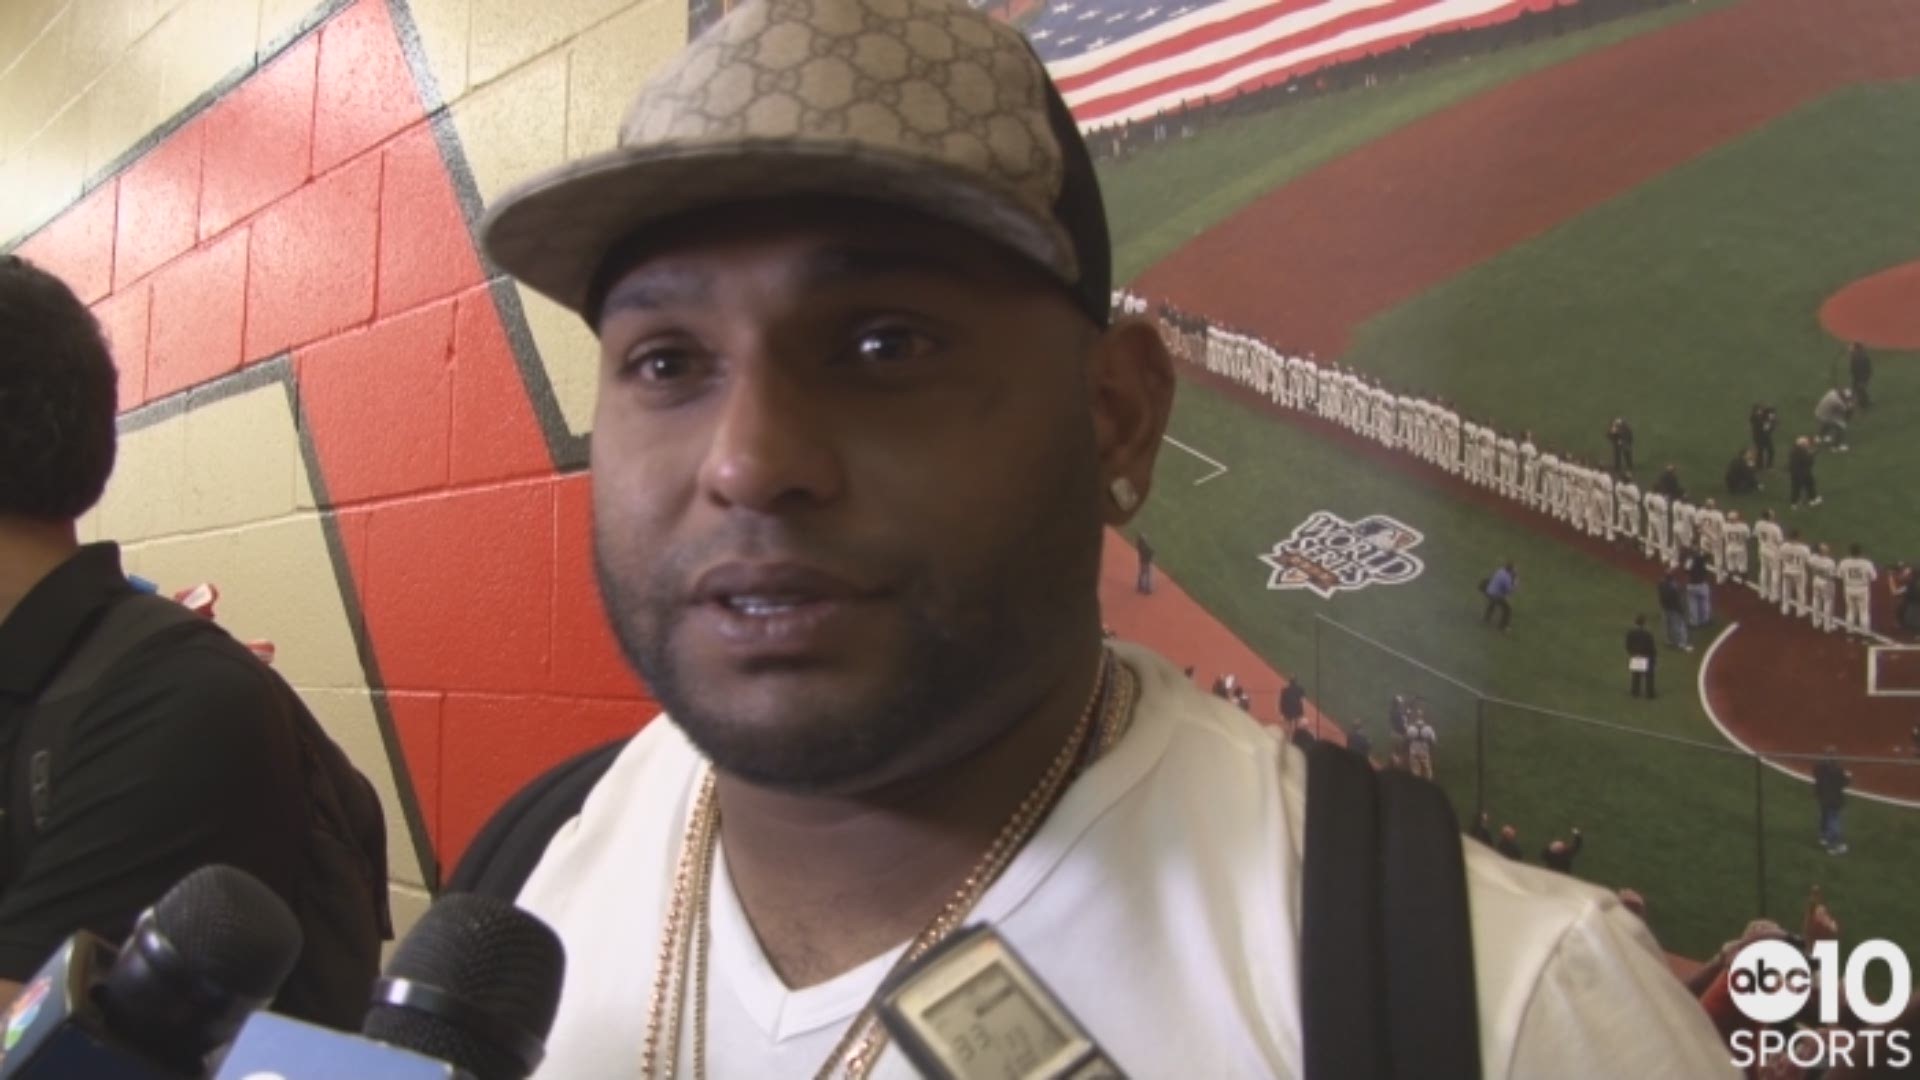 Pablo Sandoval completed his first Triple-A appearance in Sacramento on Wednesday night with the River Cats, and he spoke about his 1-for-4 performance, when he might get called up to the San Francisco Giants in wake of the Eduardo Nunez trade and why he wore a No. 47 jersey at Raley Field.